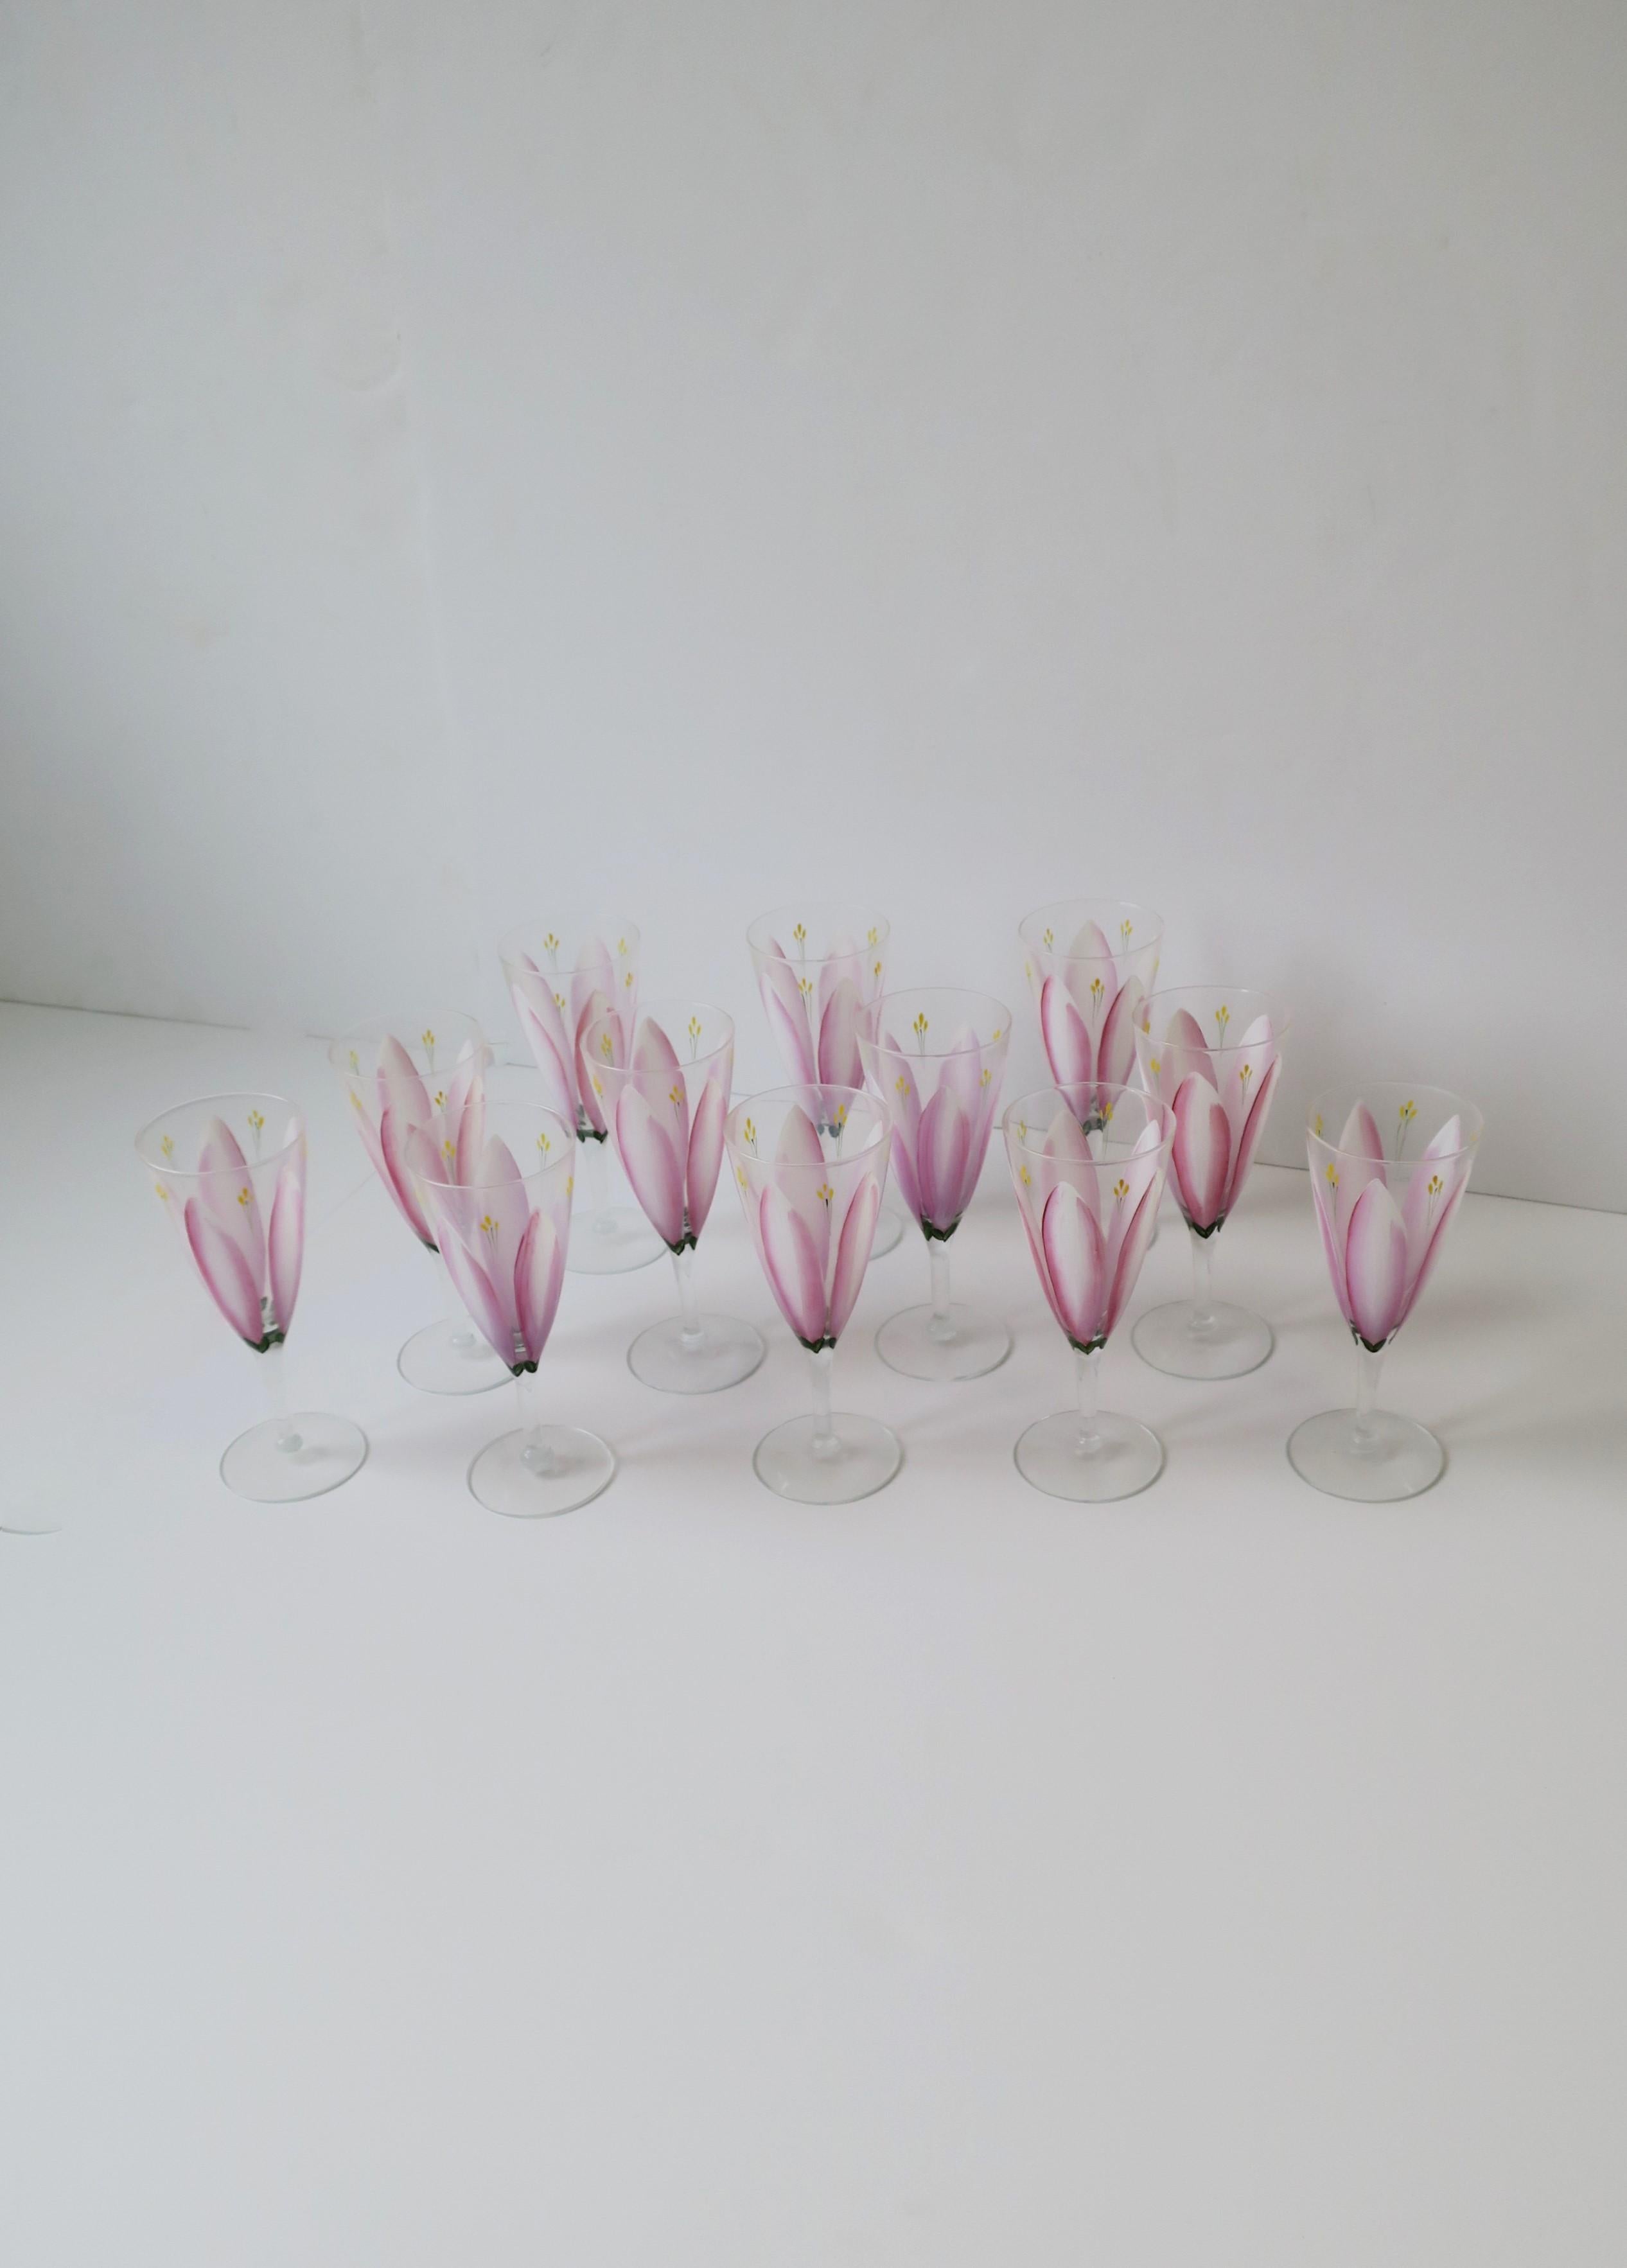 Hand-Painted Champagne Flutes Glasses Hand Painted Pink Tulip Flower Design, Set of 12 For Sale